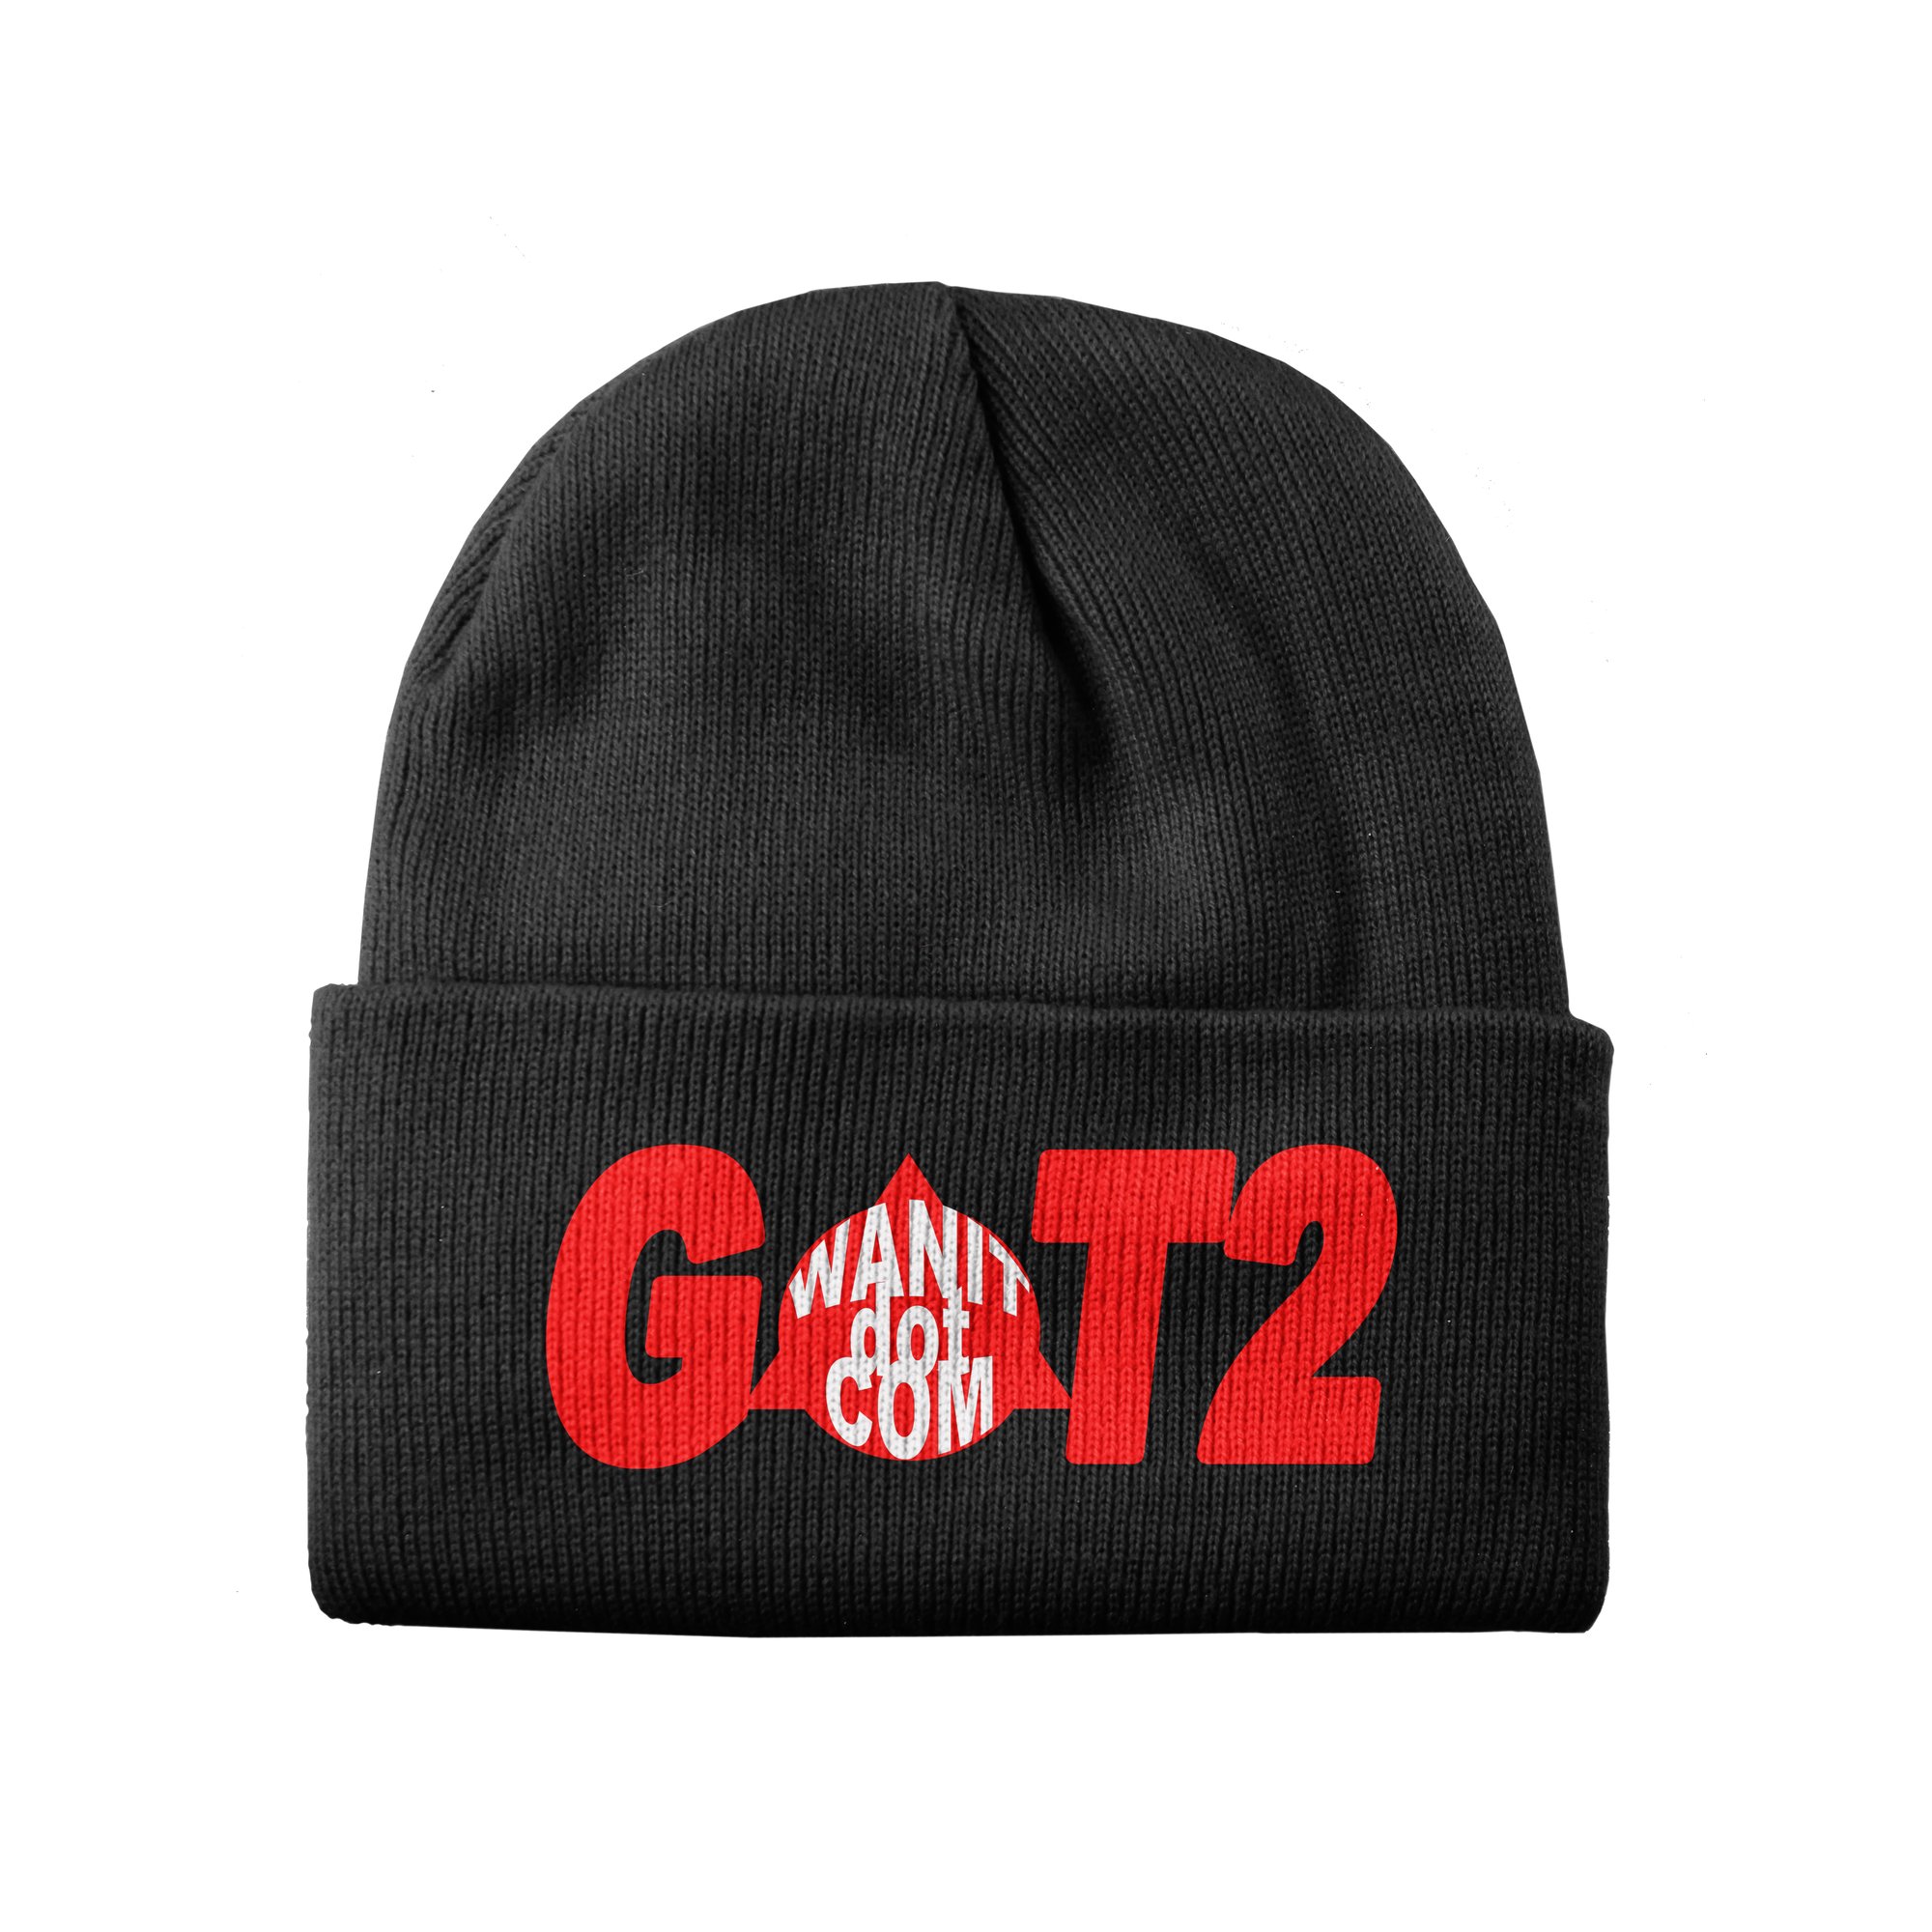 Image of Cuffed Beanie-G2W logo RED and WHITE on BLACK